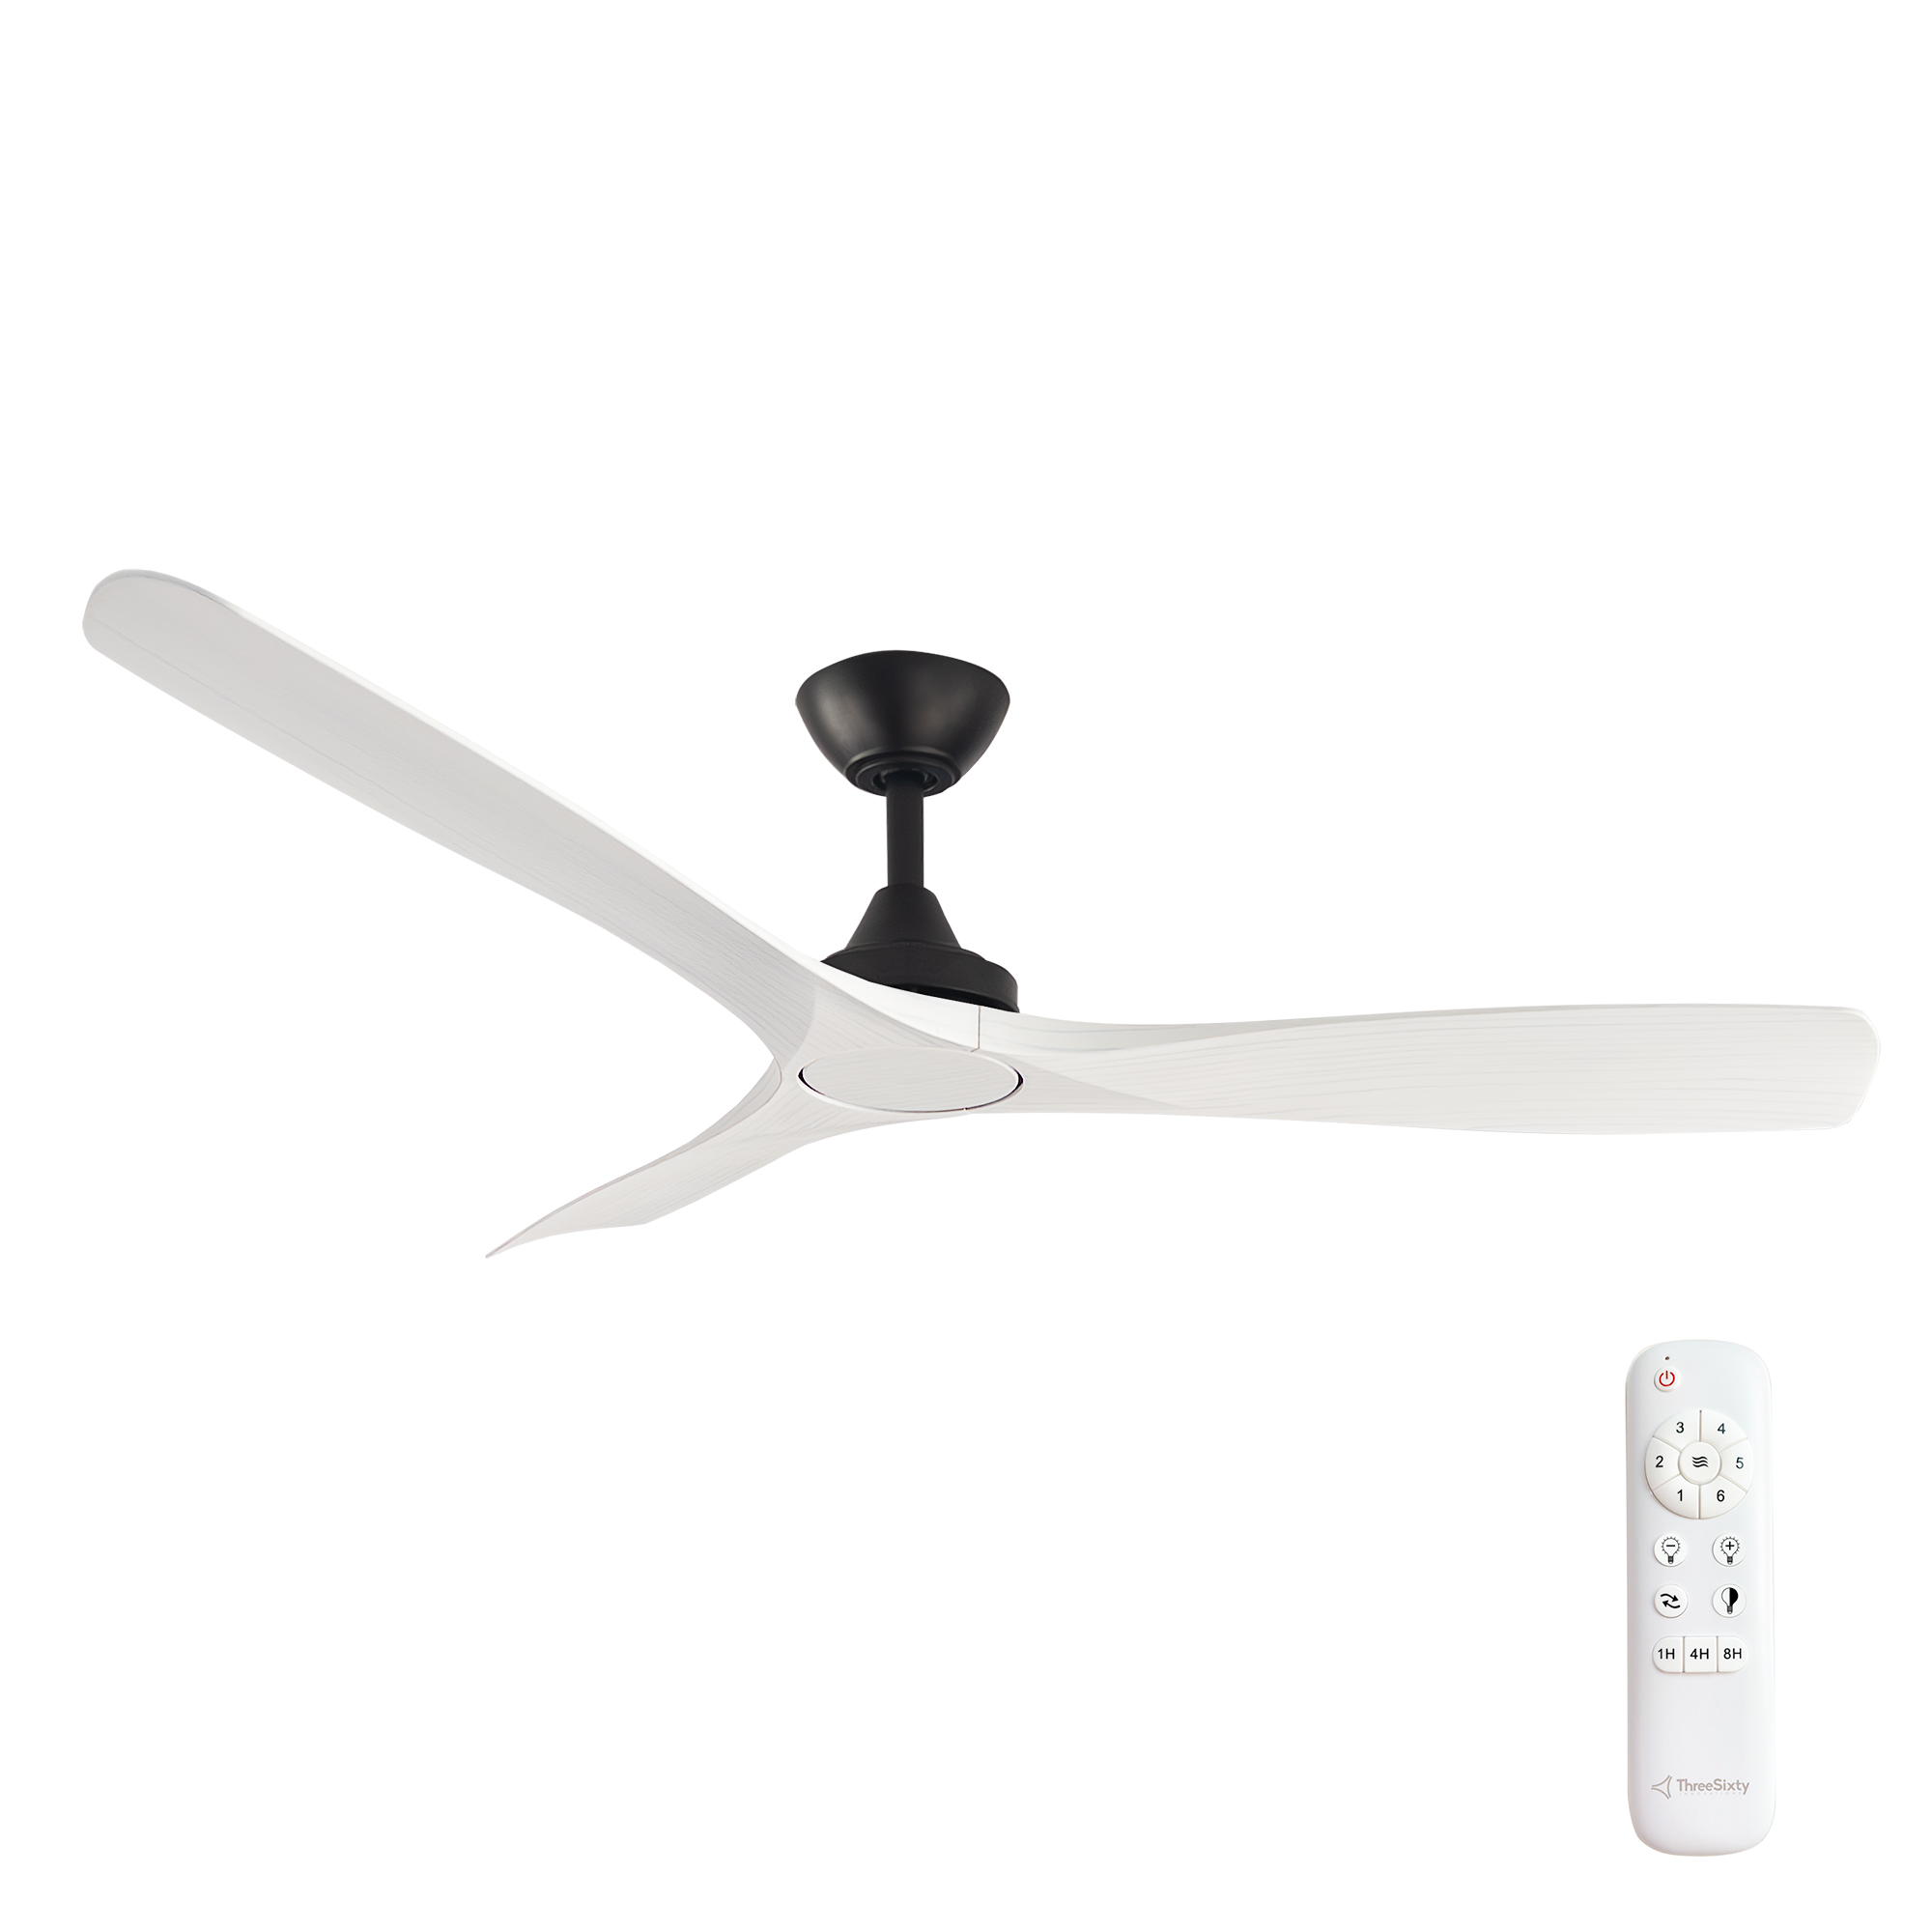 52" Spitfire DC Ceiling Fan in Black with White Wash blades